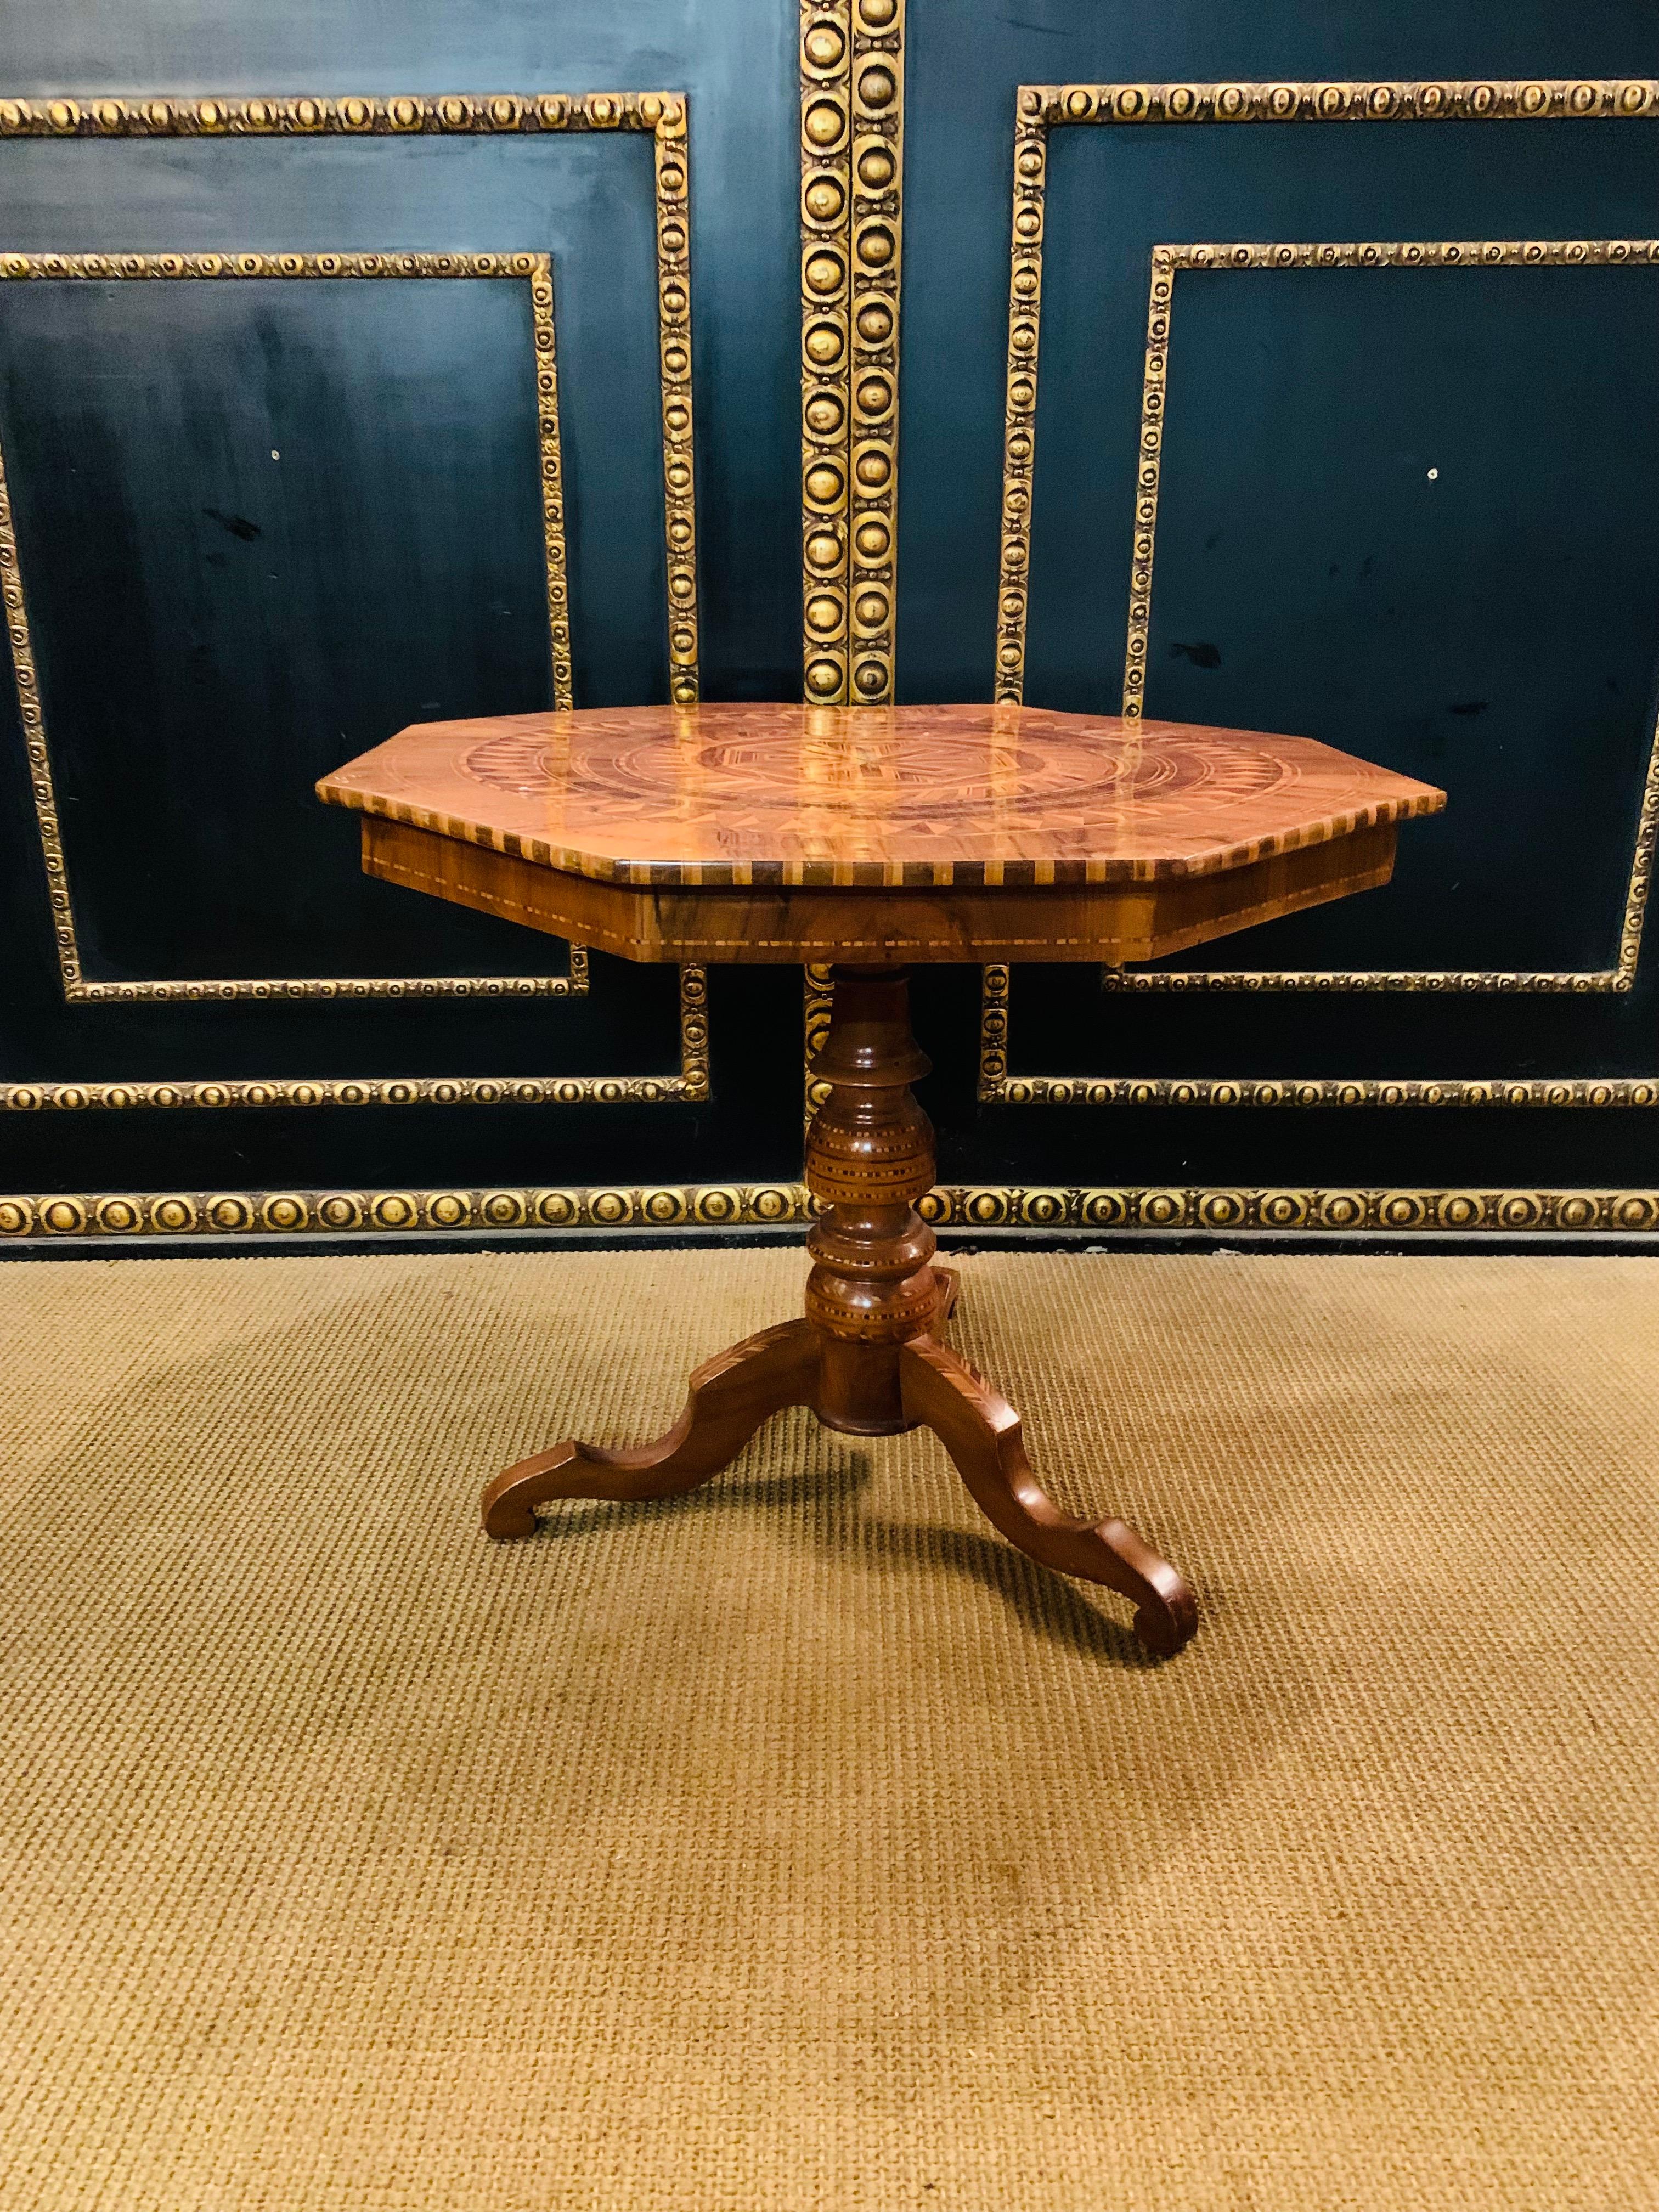 Antique marquetry table
Complex inlay work

Probably Italy around 1850/1860
Walnut and many fruit woods such as plum
Cherry pear etc.
Age-related signs of use, color fading,
Partly slight warping of the veneer
Color differences due to